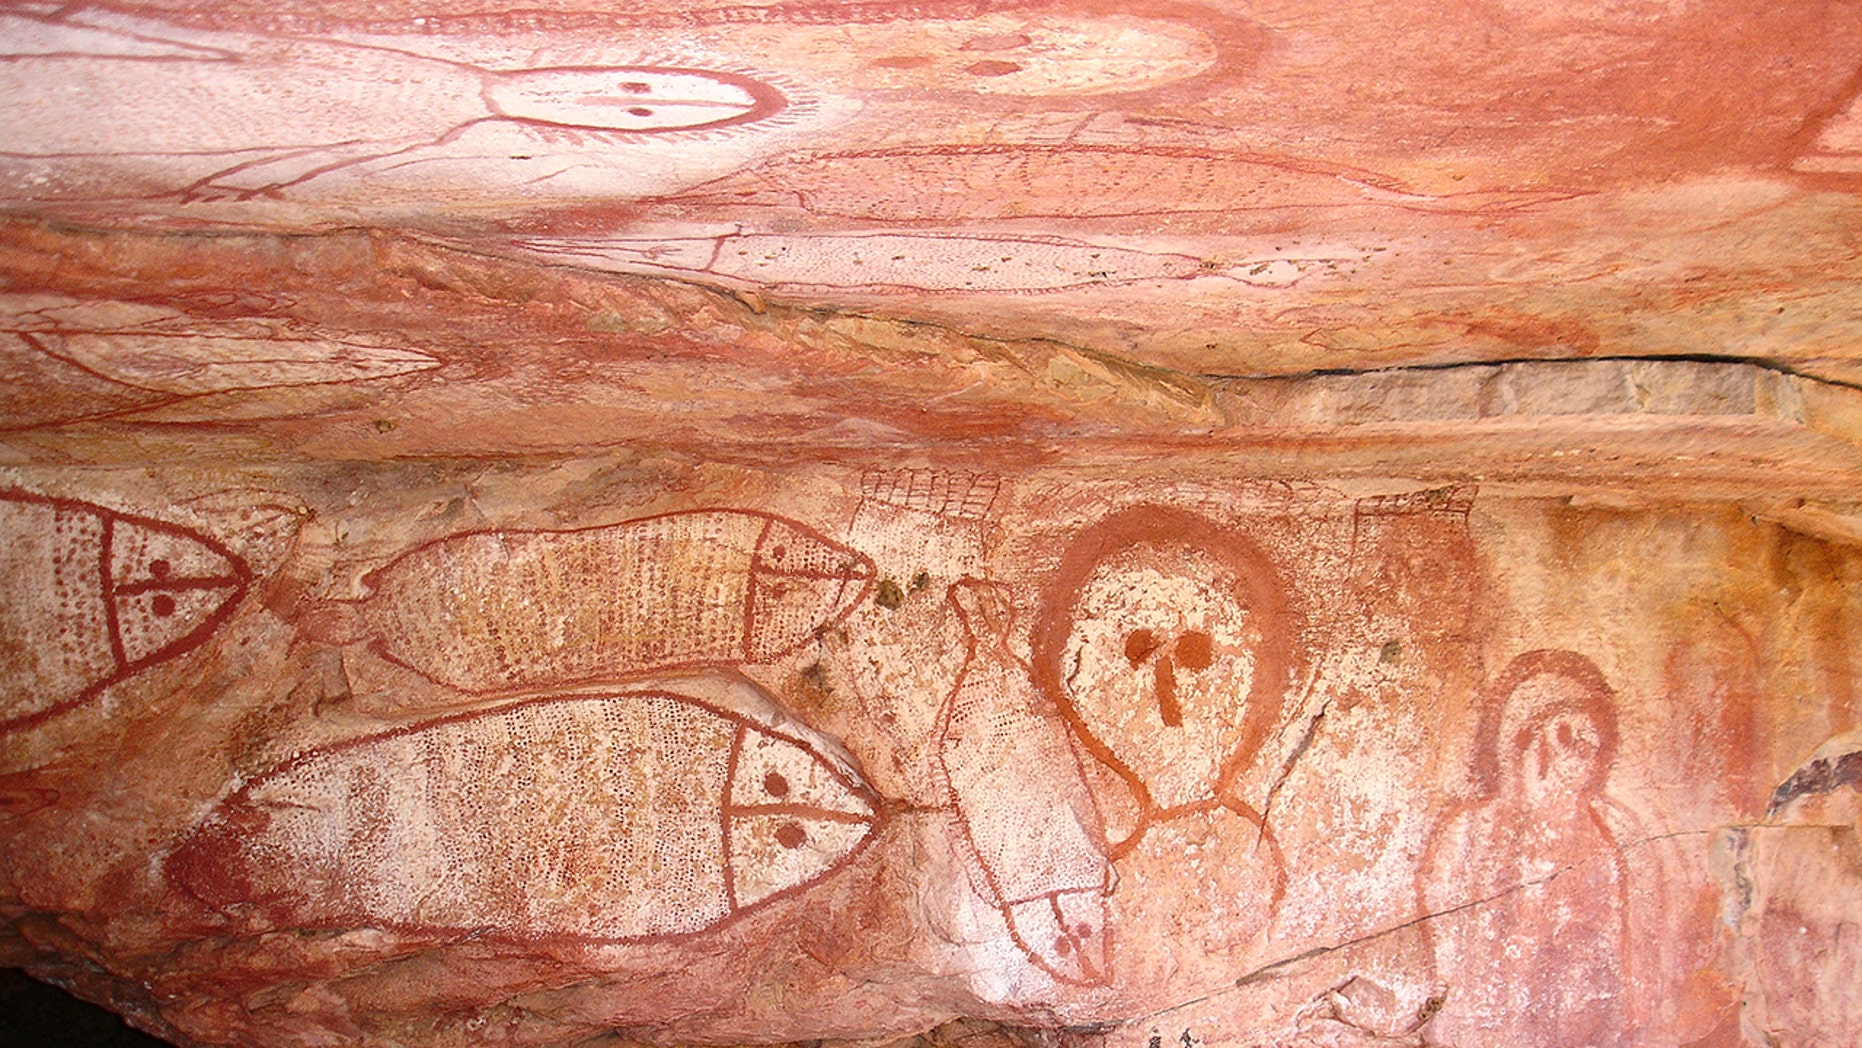 Did ancient aliens and exploring Egyptians visit Australia 50,000 years ago?